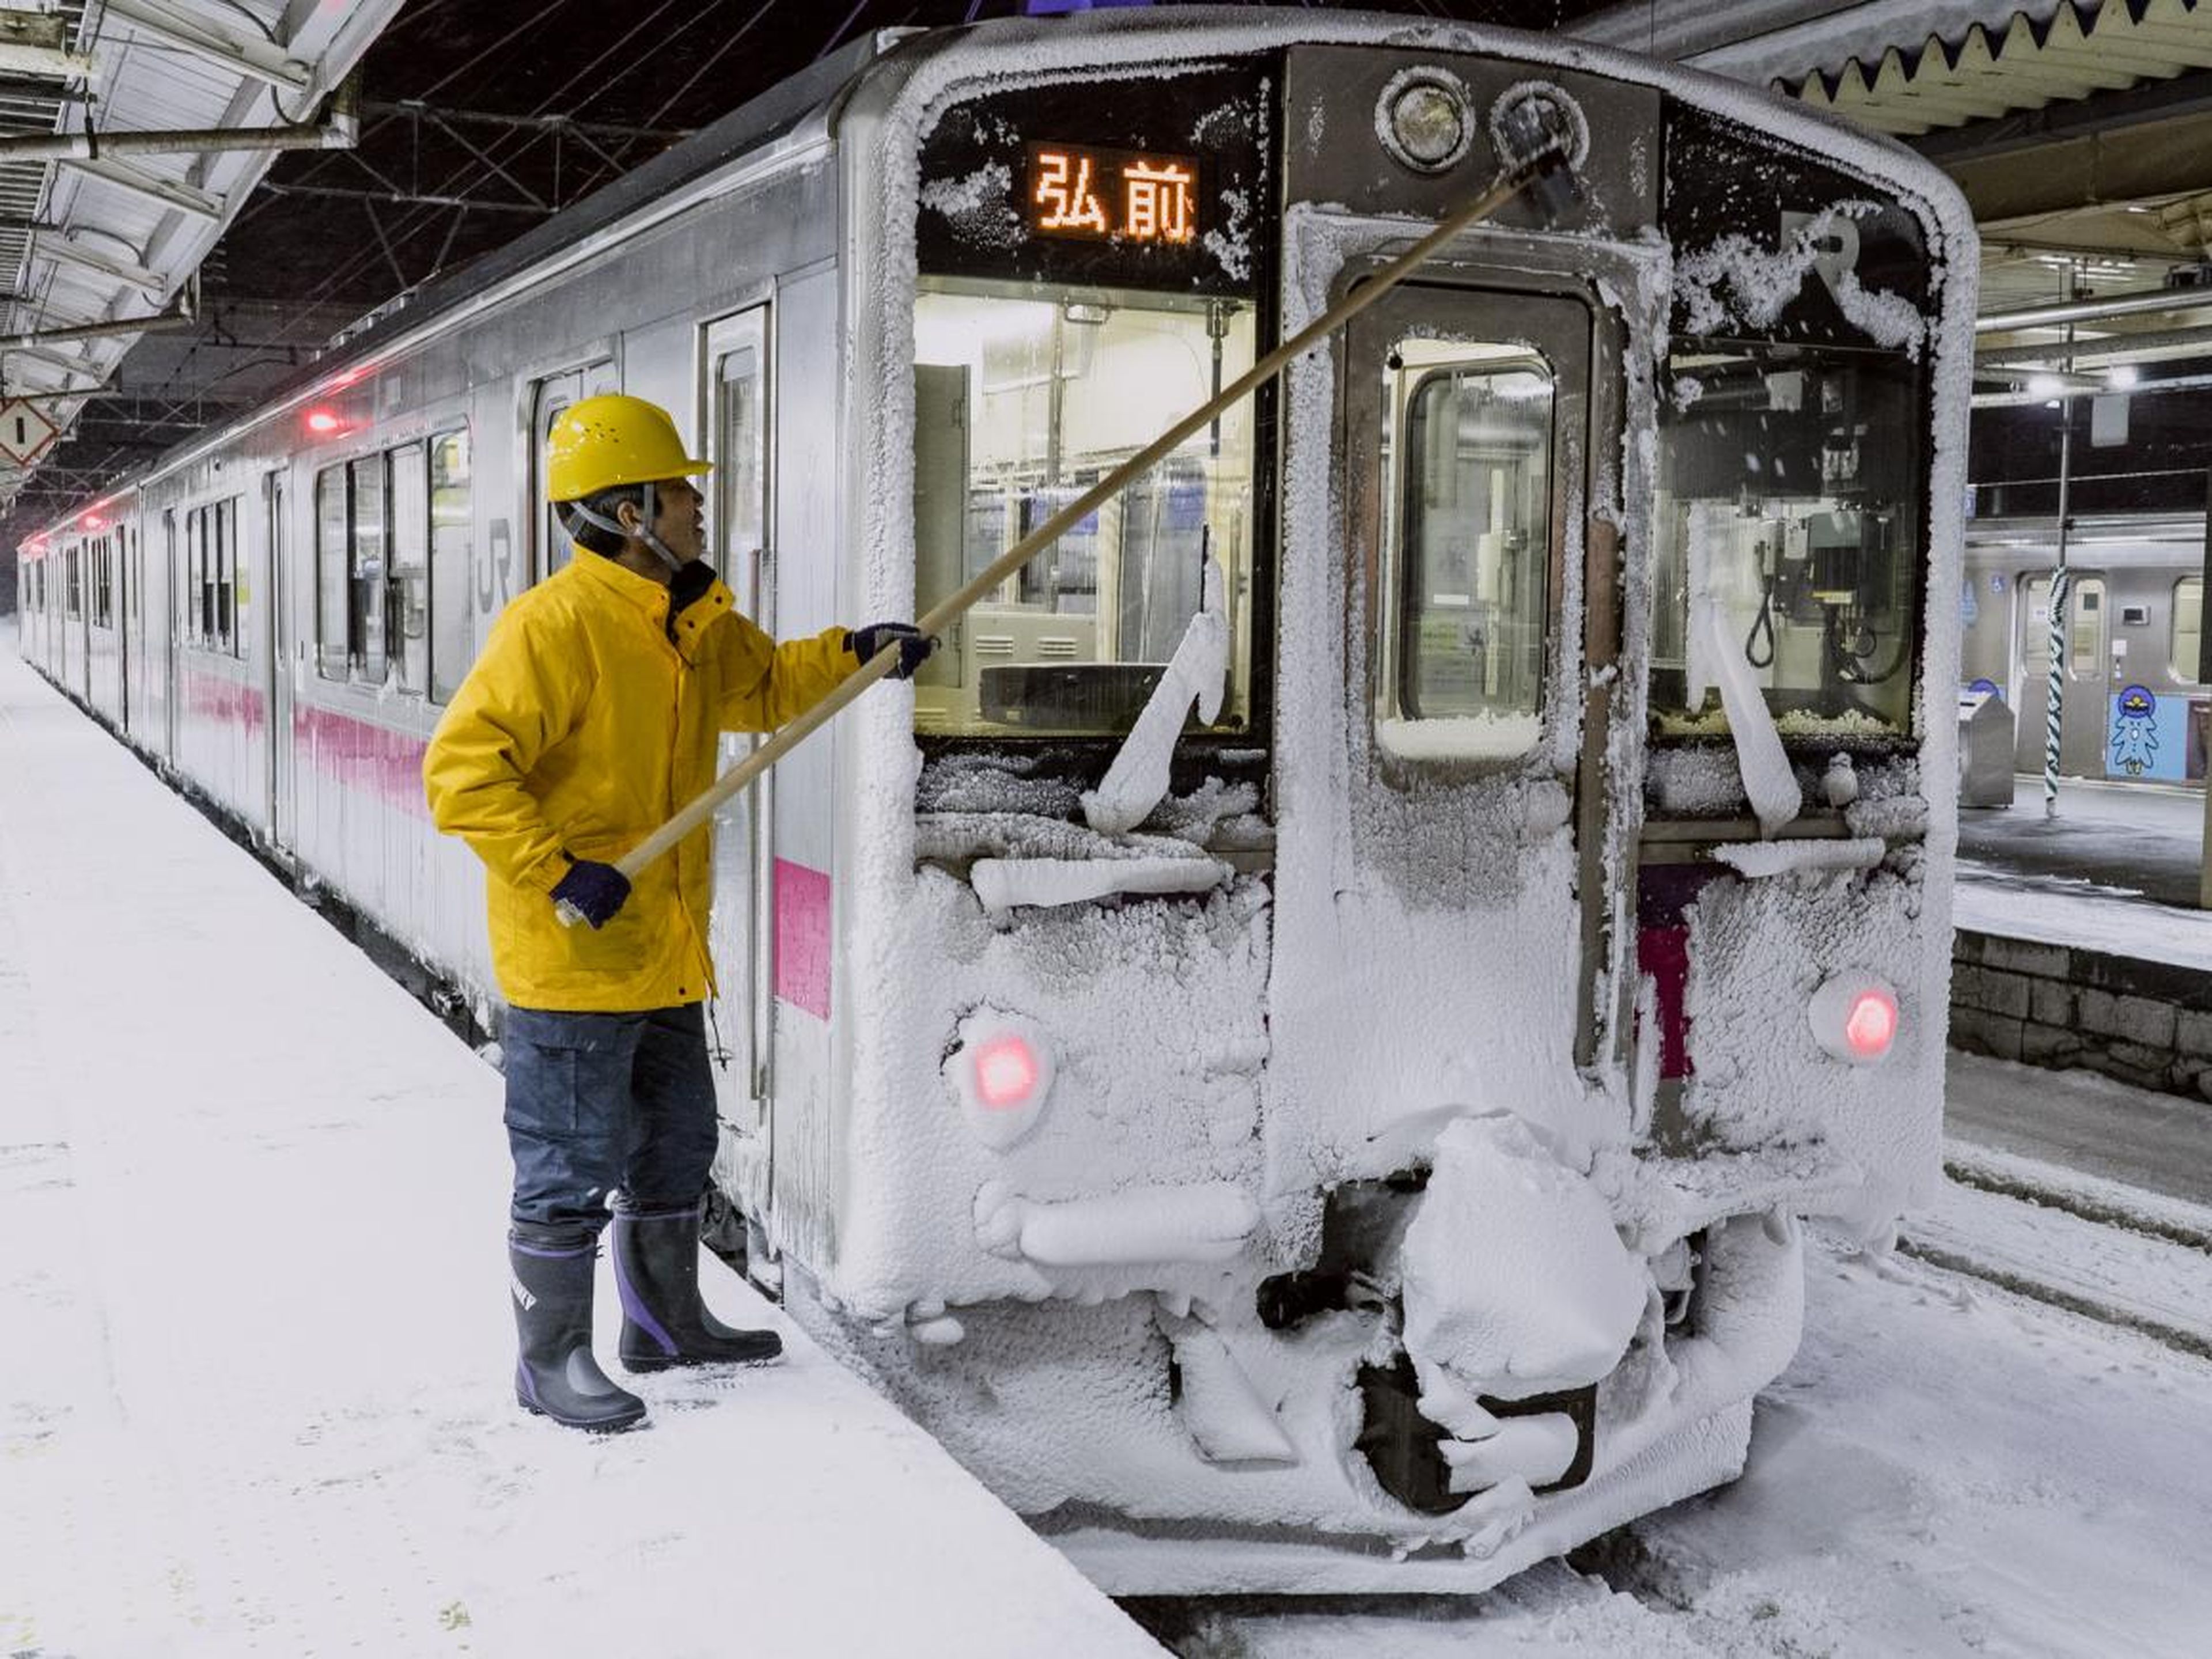 Because of the smaller population size, the public transportation system in Aomori is less extensive as infrastructures in Tokyo and other larger cities.